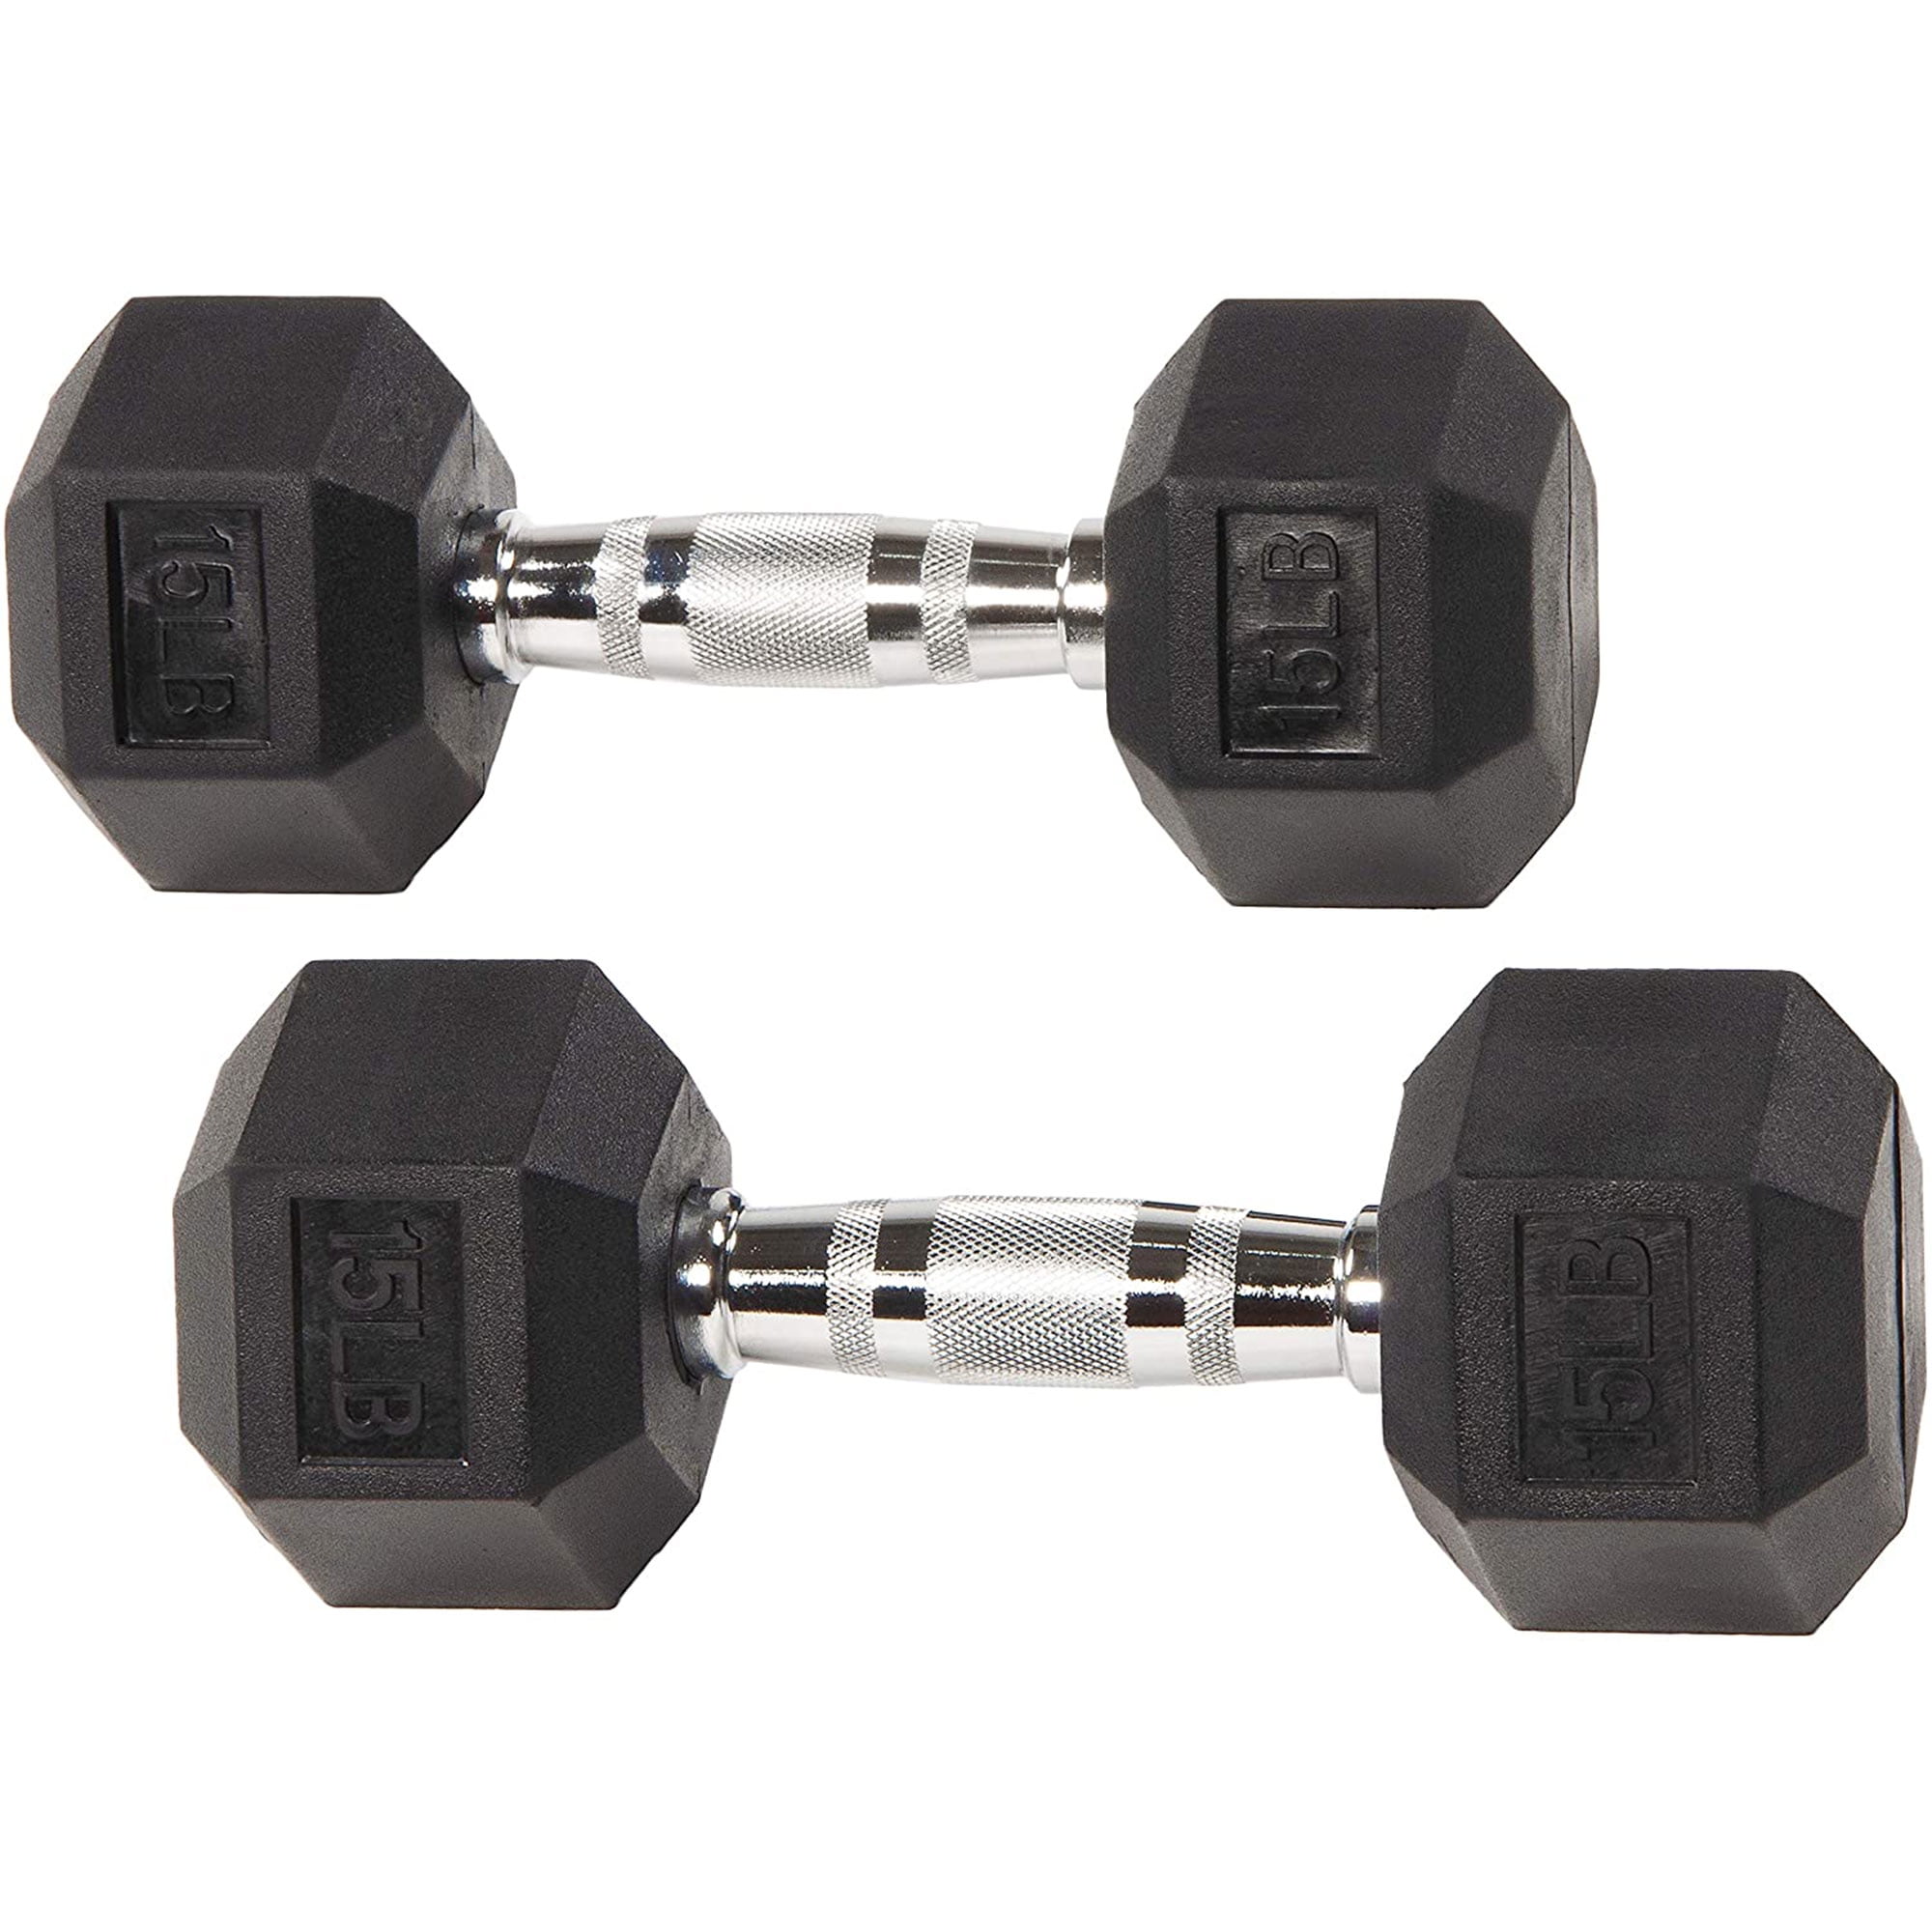 2X 15kg Rubber Encased Dumbbell Hex Weights Gym Fitness/Workout/Weight Lifting 